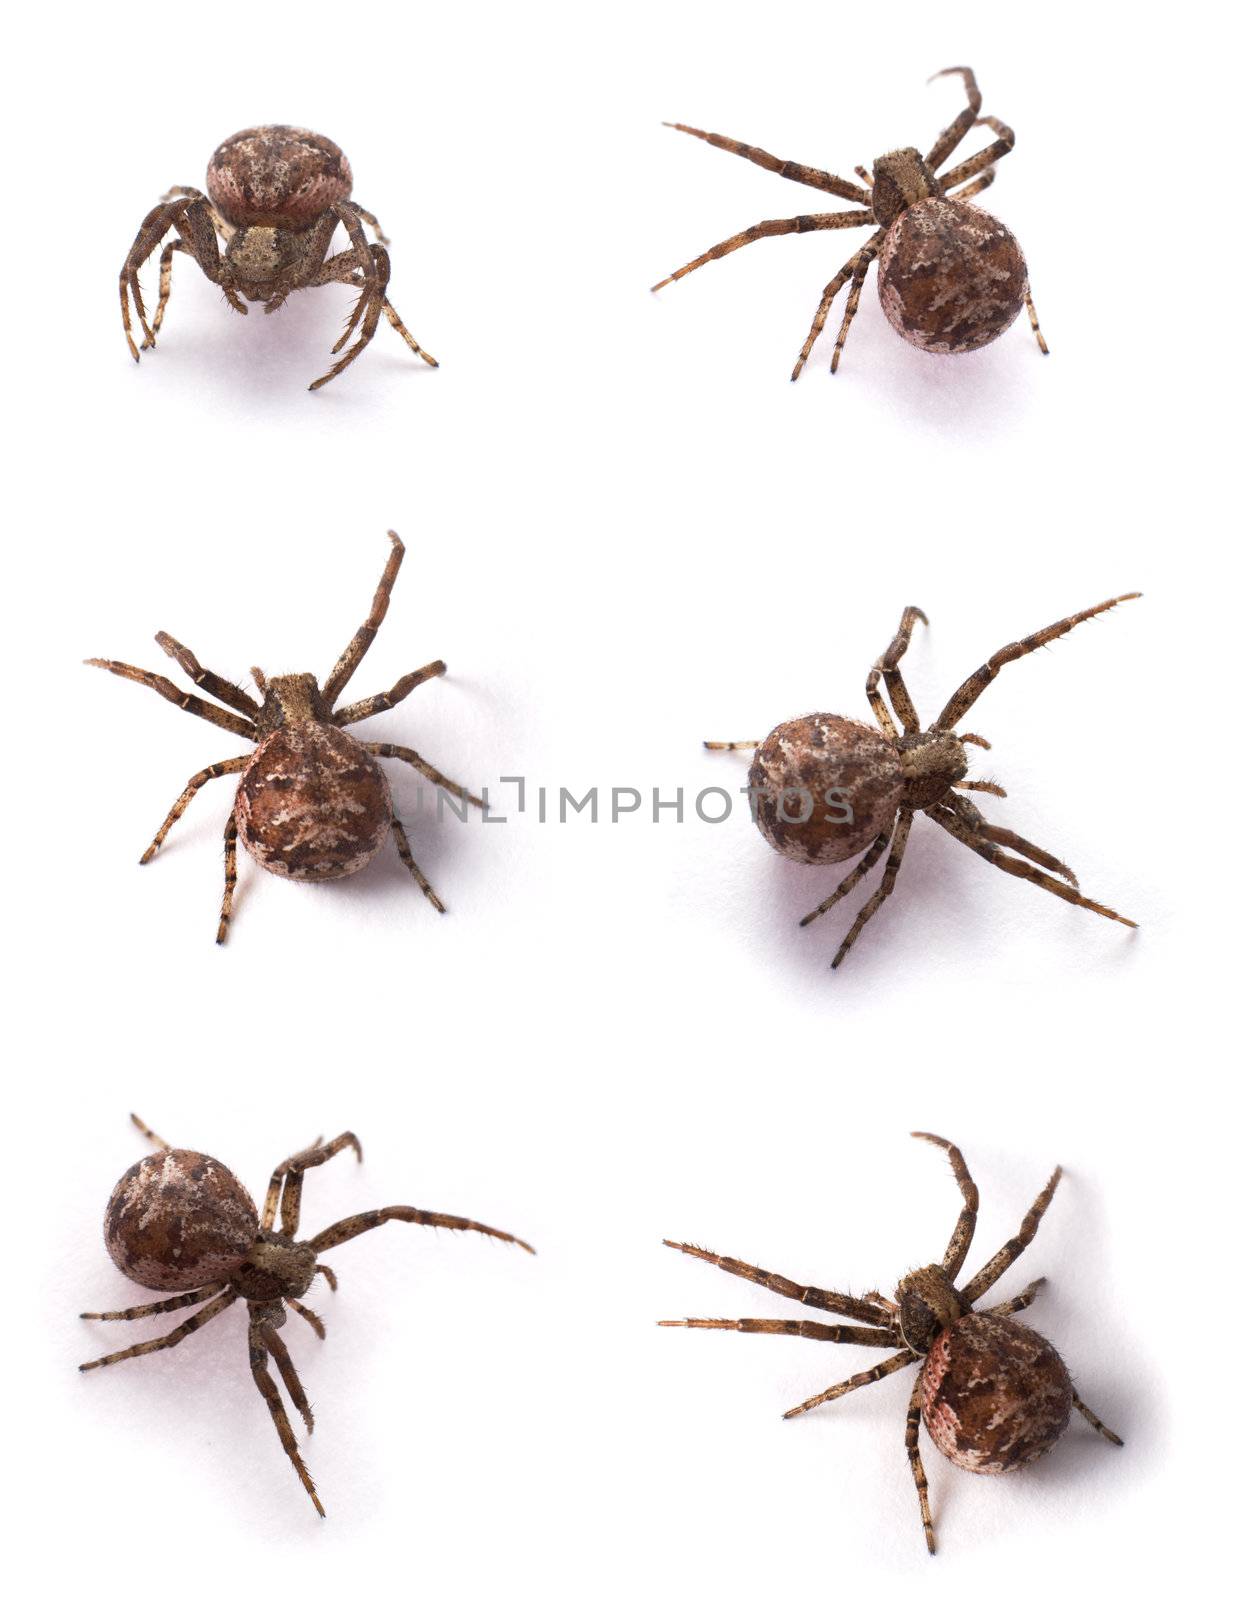 Six yellow spiders on a white background